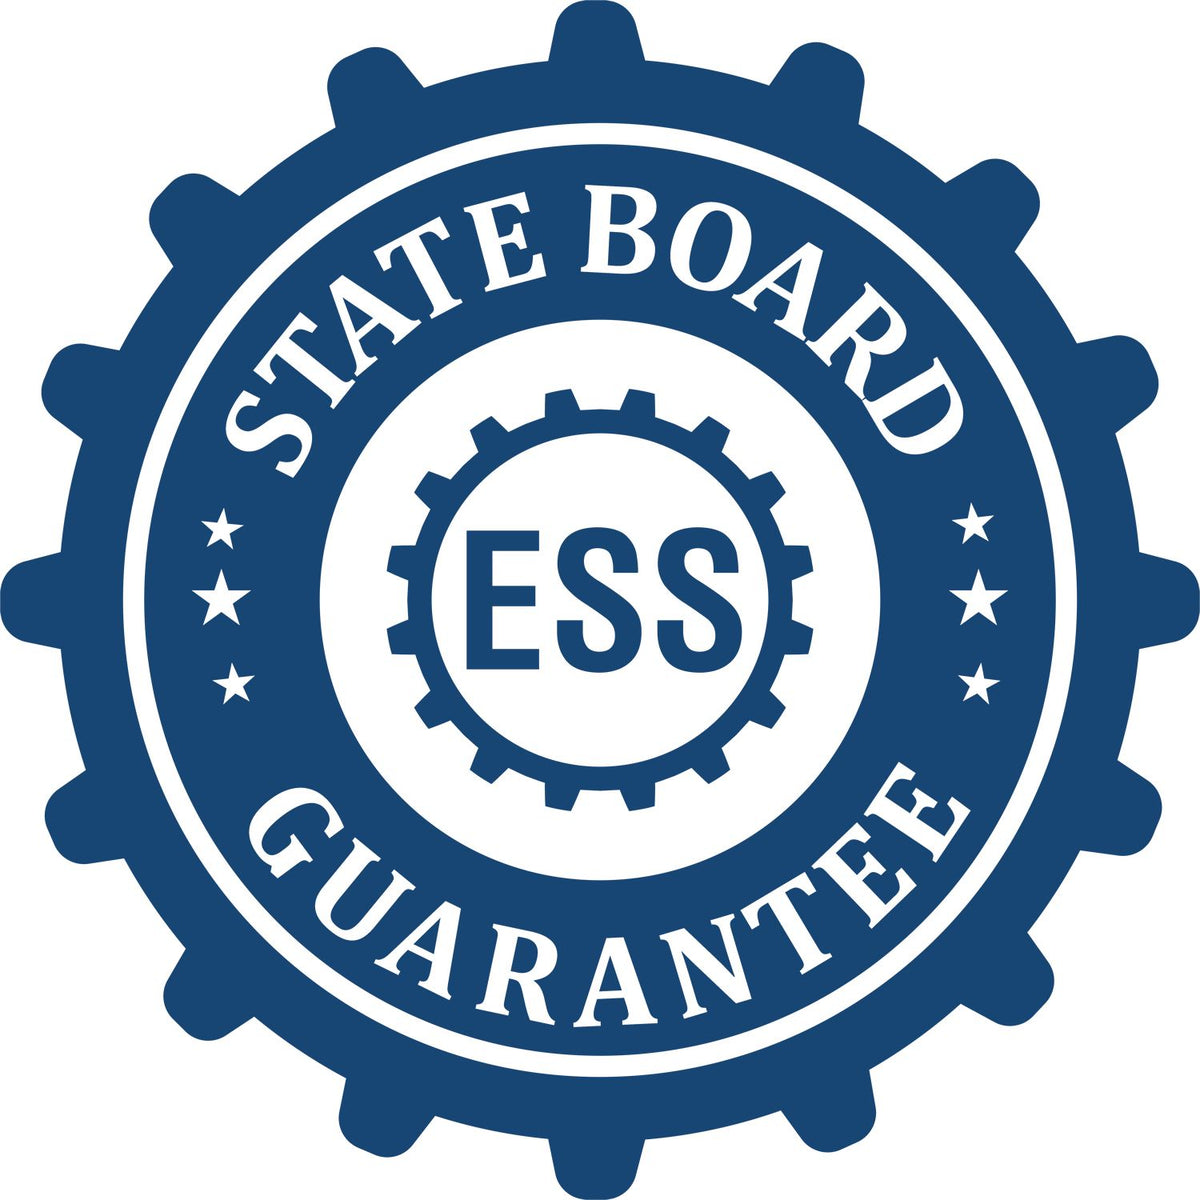 An emblem in a gear shape illustrating a state board guarantee for the Hybrid Oklahoma Land Surveyor Seal